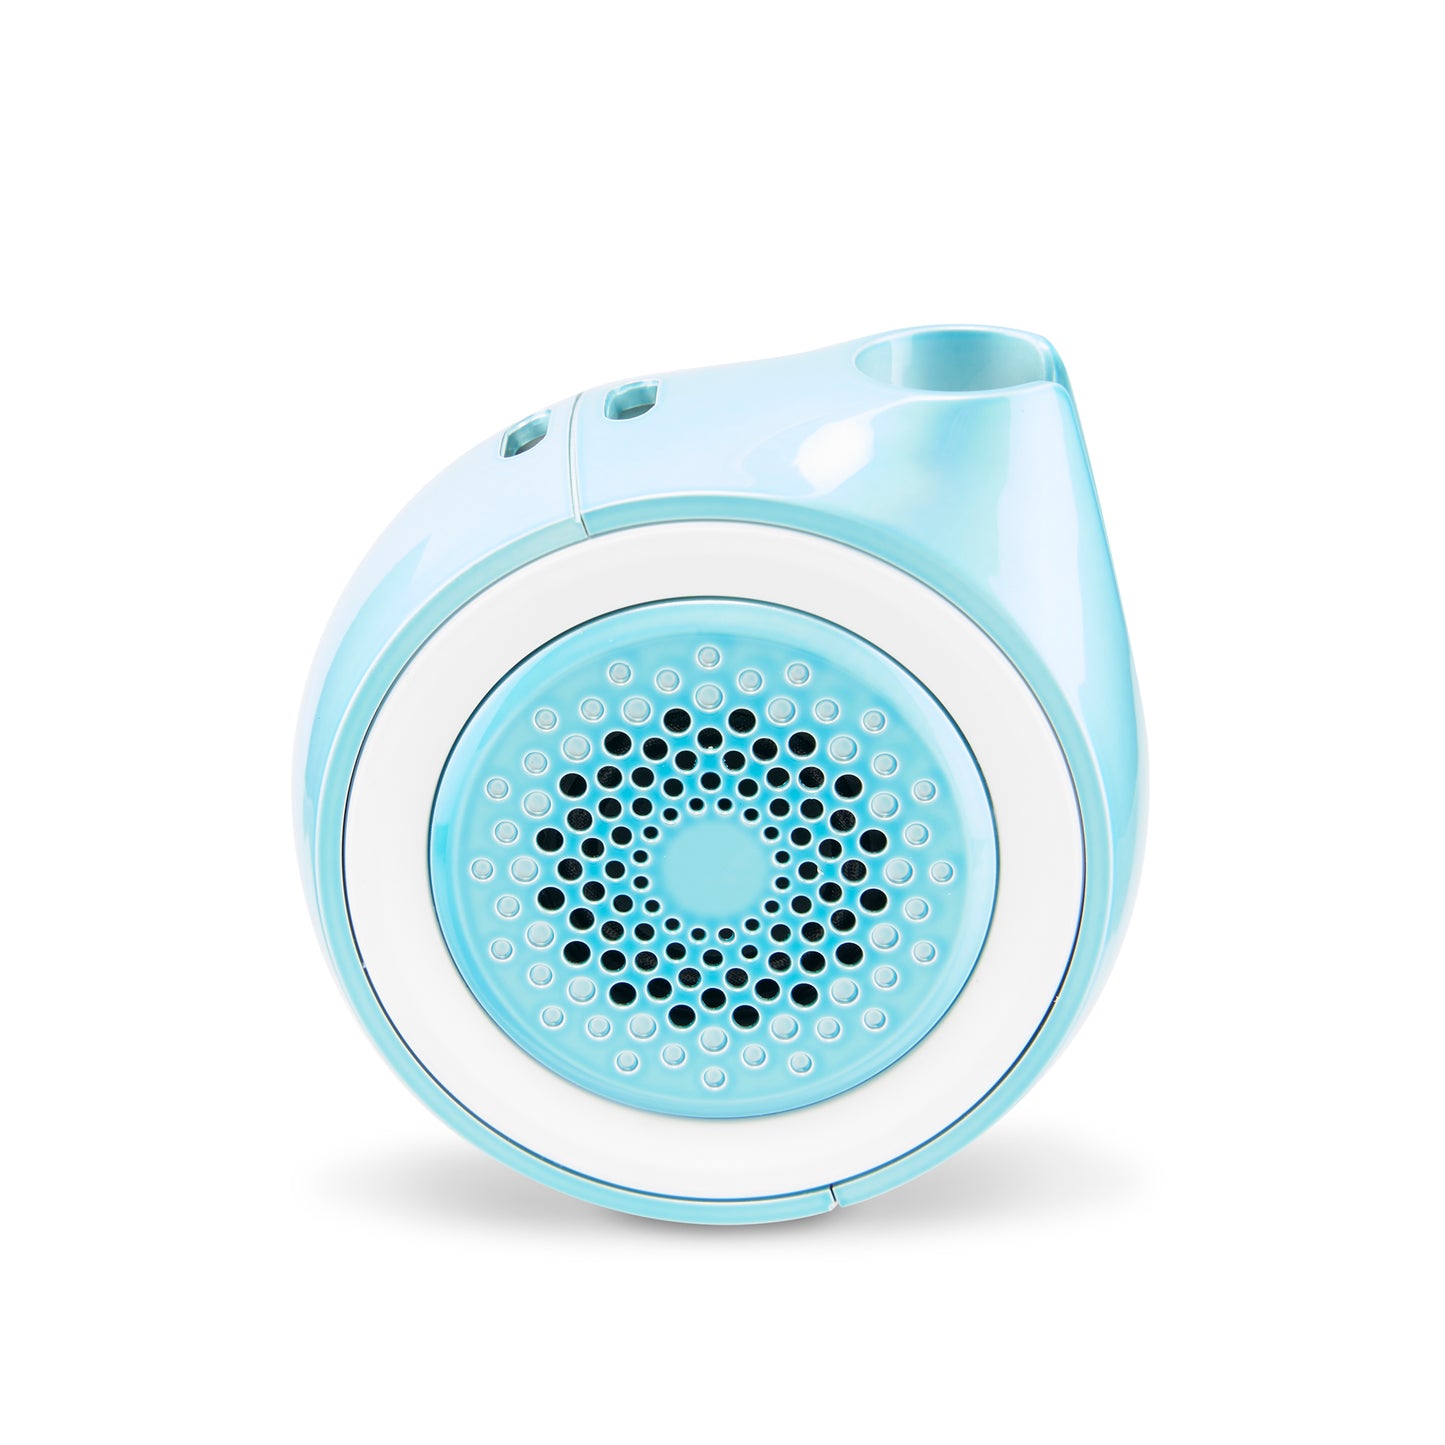 The Ooze Movez Speaker Vape in Arctic Blue is shown with the speaker side facing the camera.